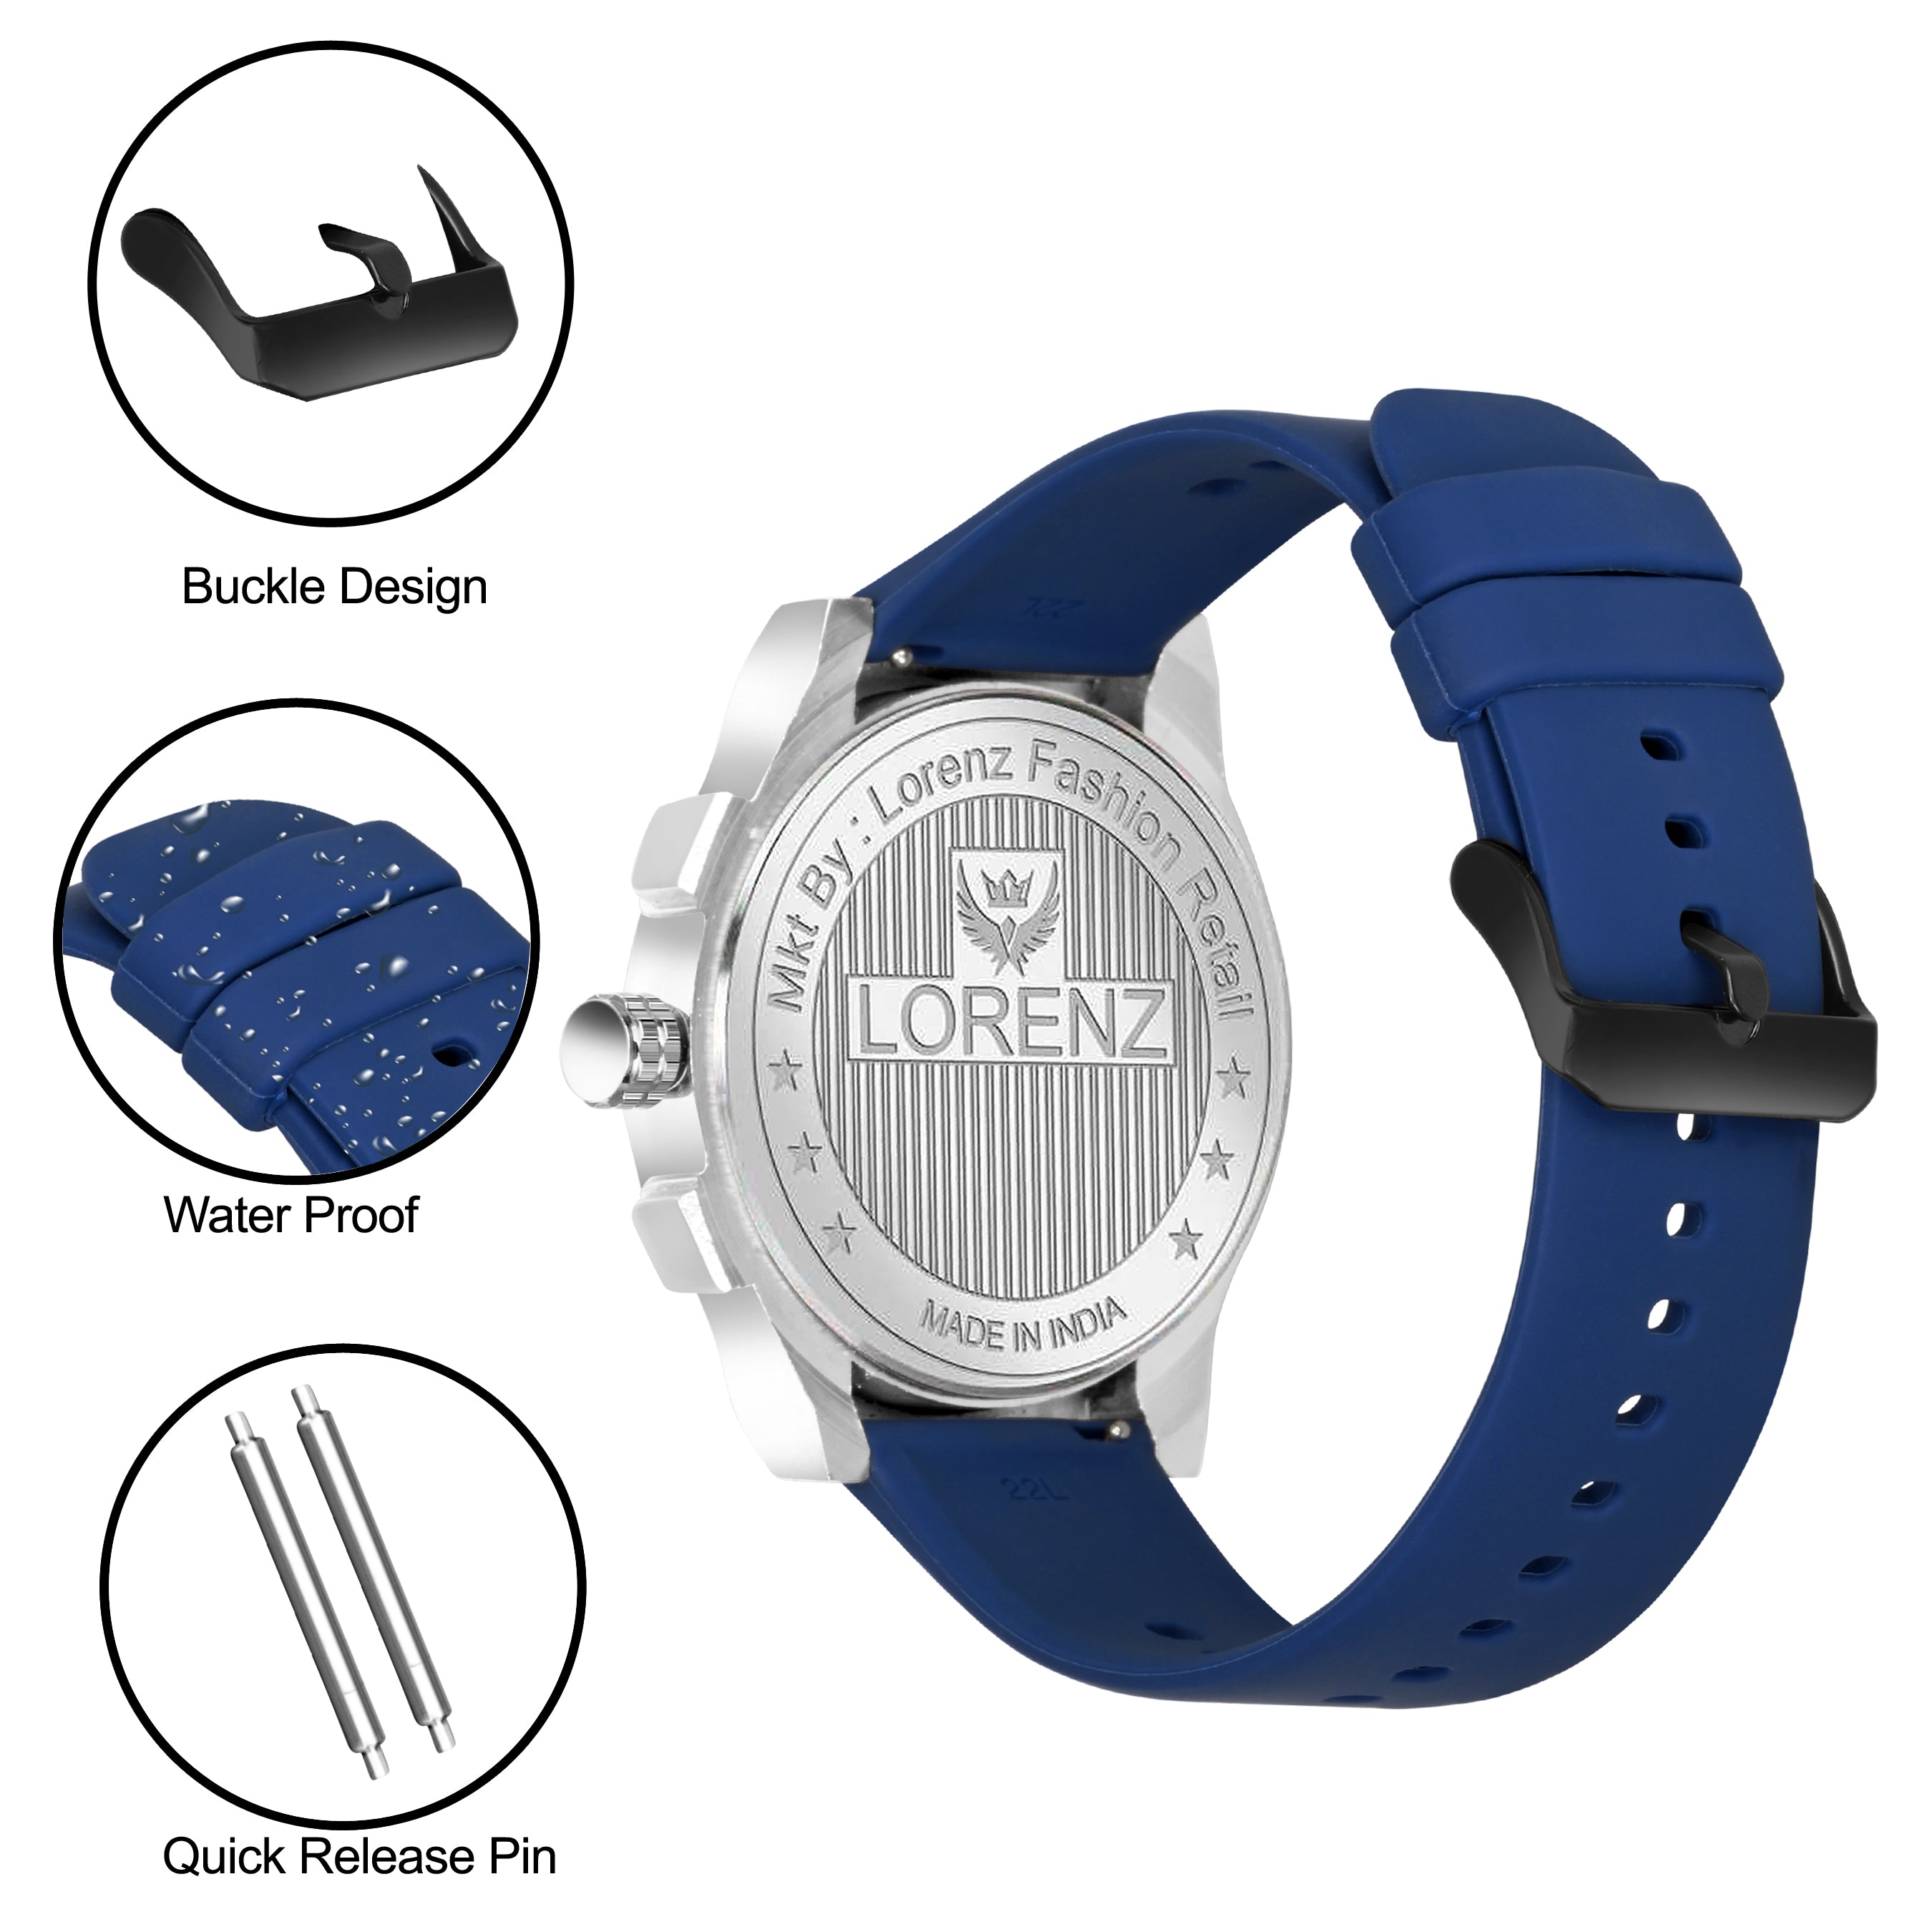 Lorenz Men's Blue Dial Analog Watch with Silicone Strap